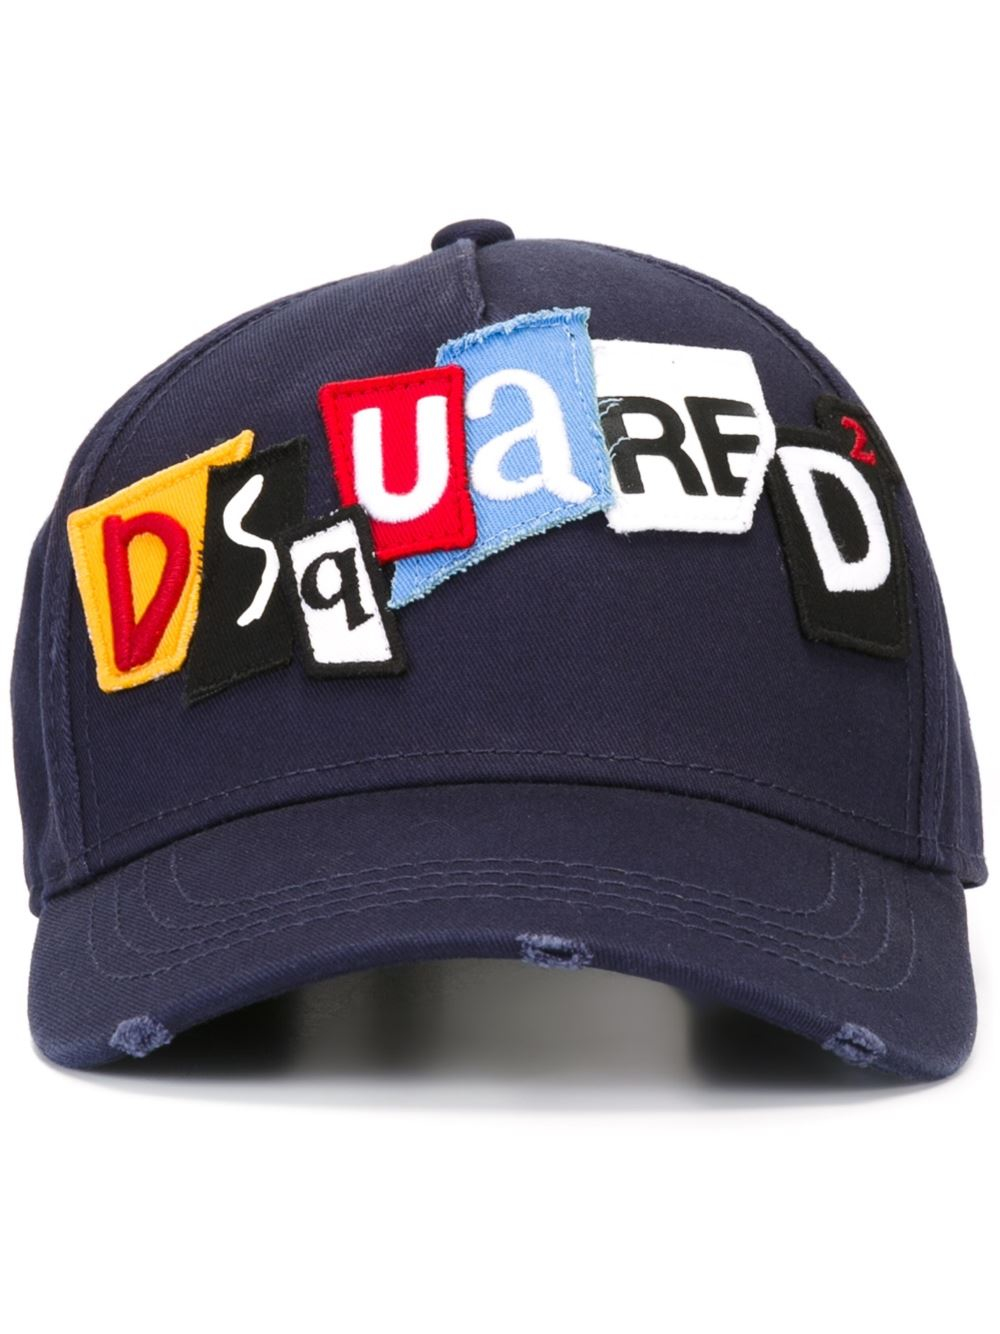 dsquared patch